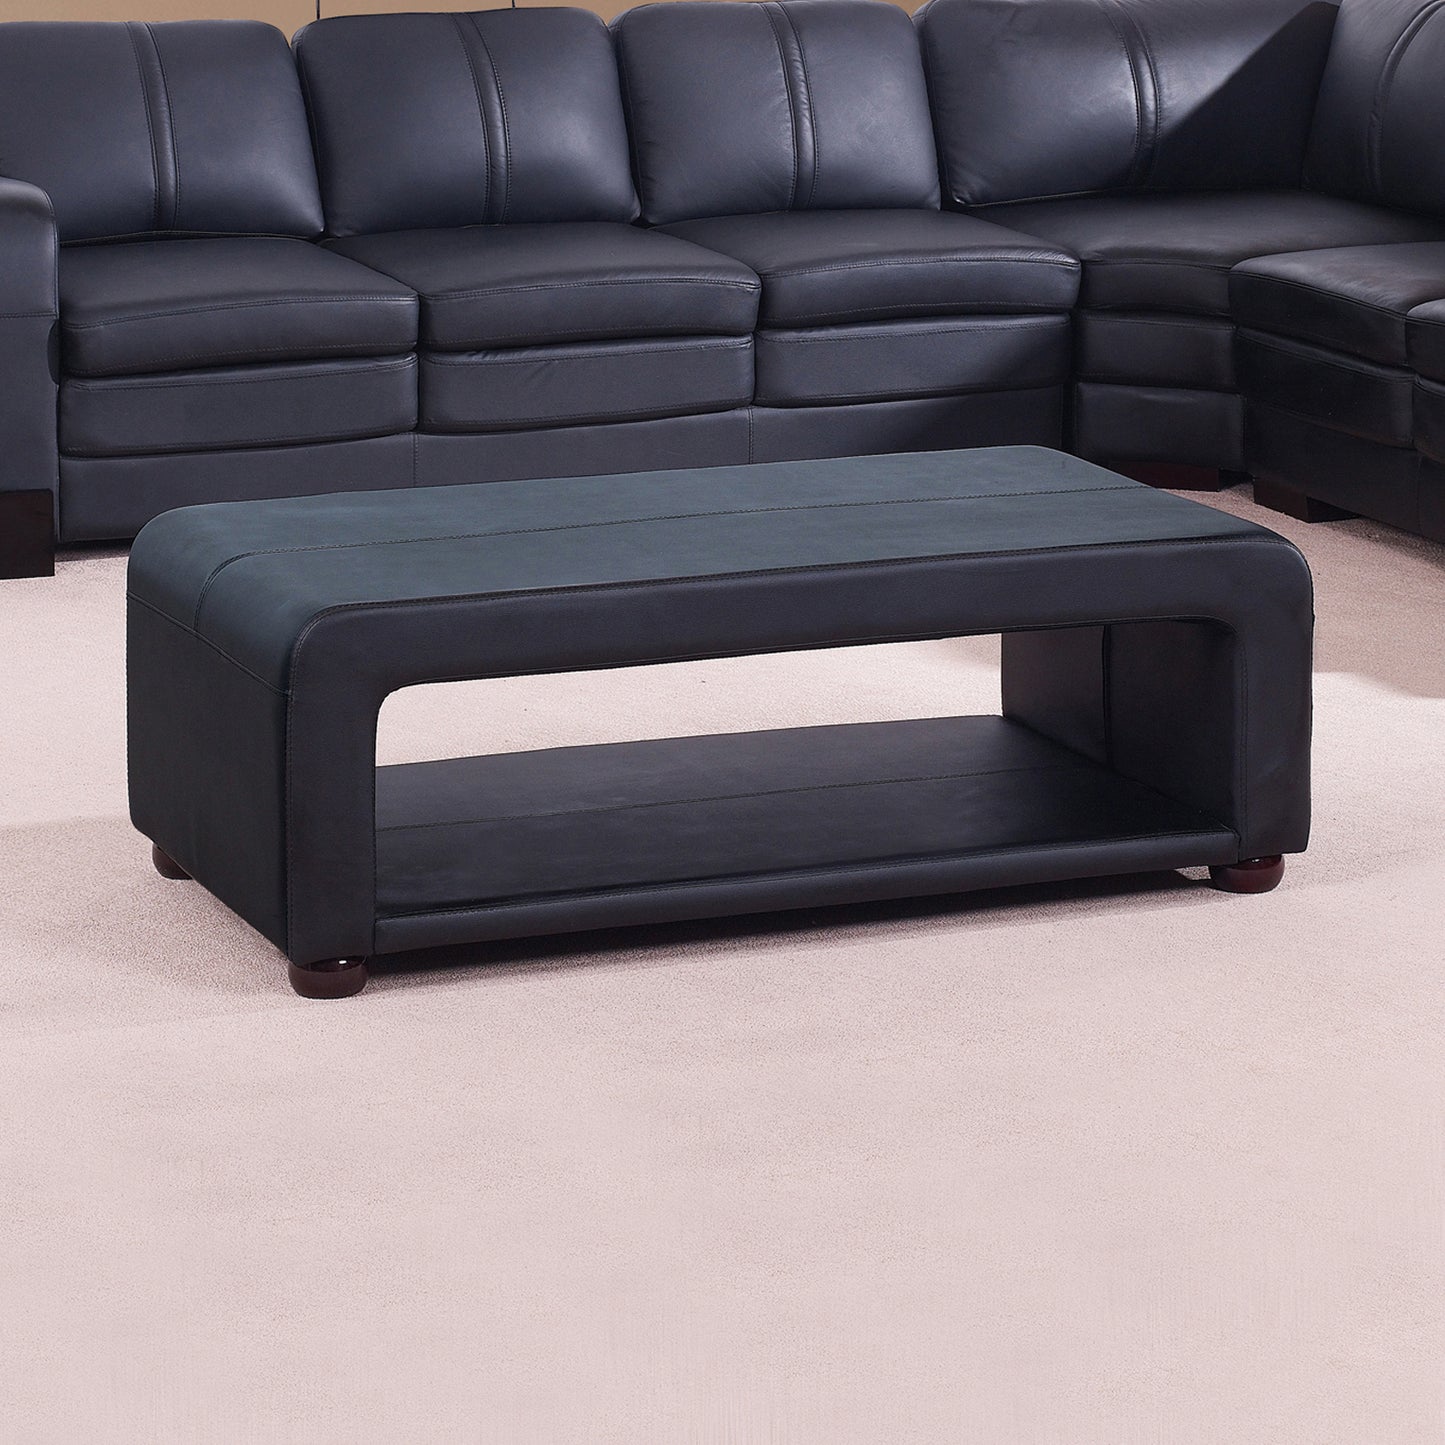 Coffee Table Upholstered PU Leather in Black Colour with open storage - image7